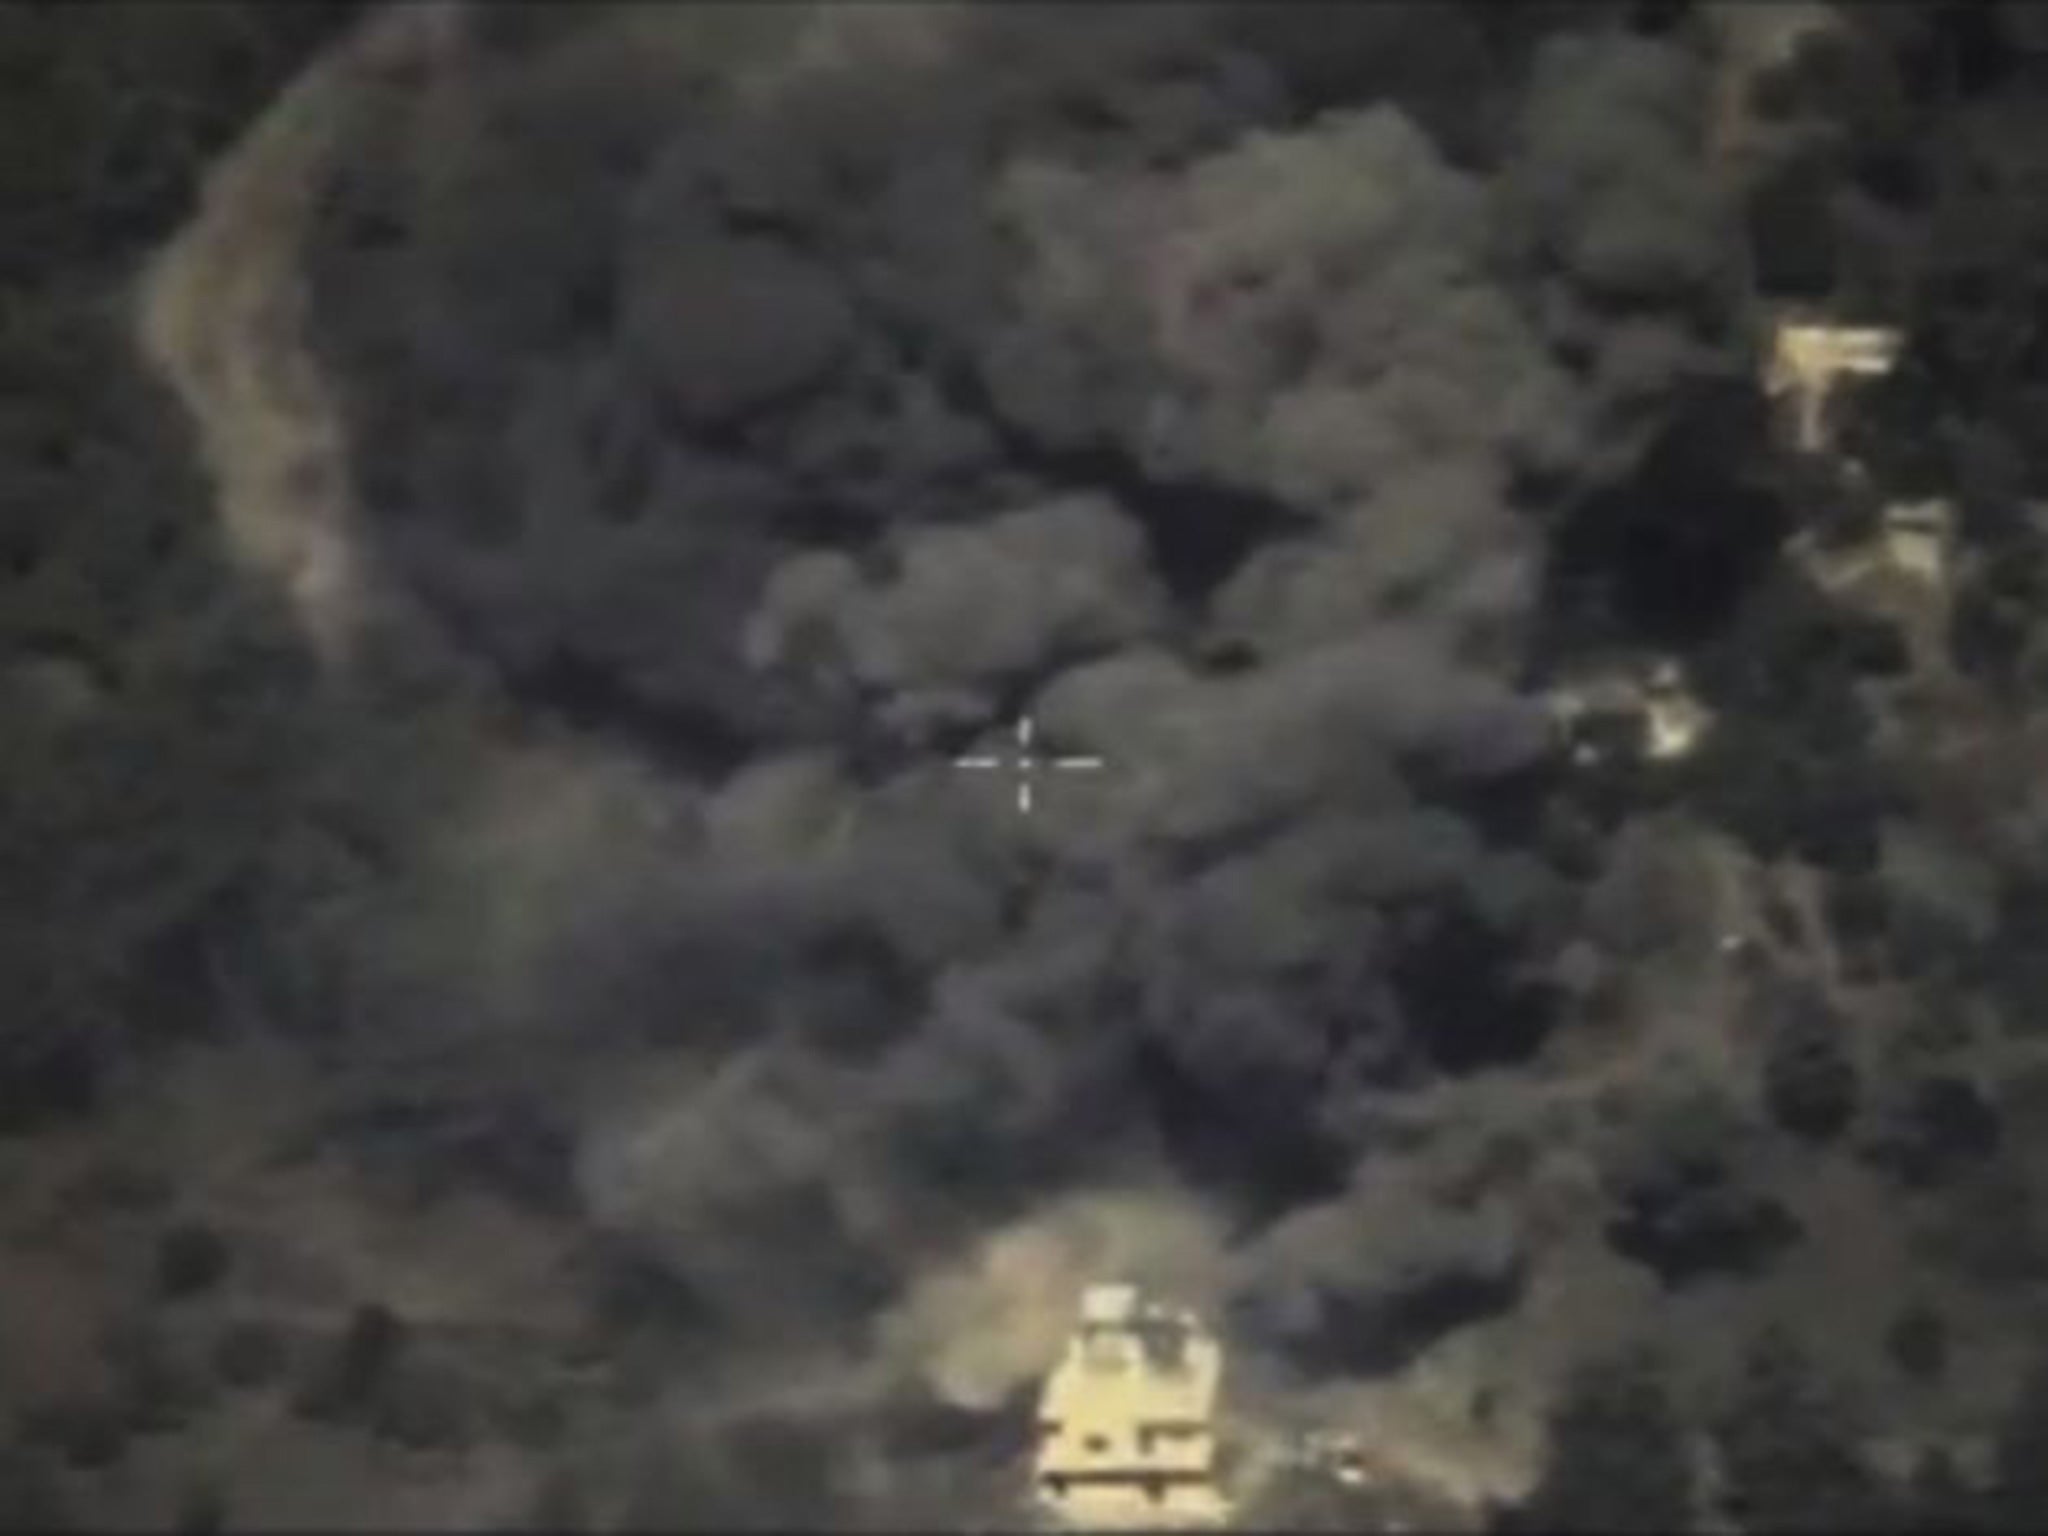 An image from the Russian Defense Ministry website show an airstrike in in Syria